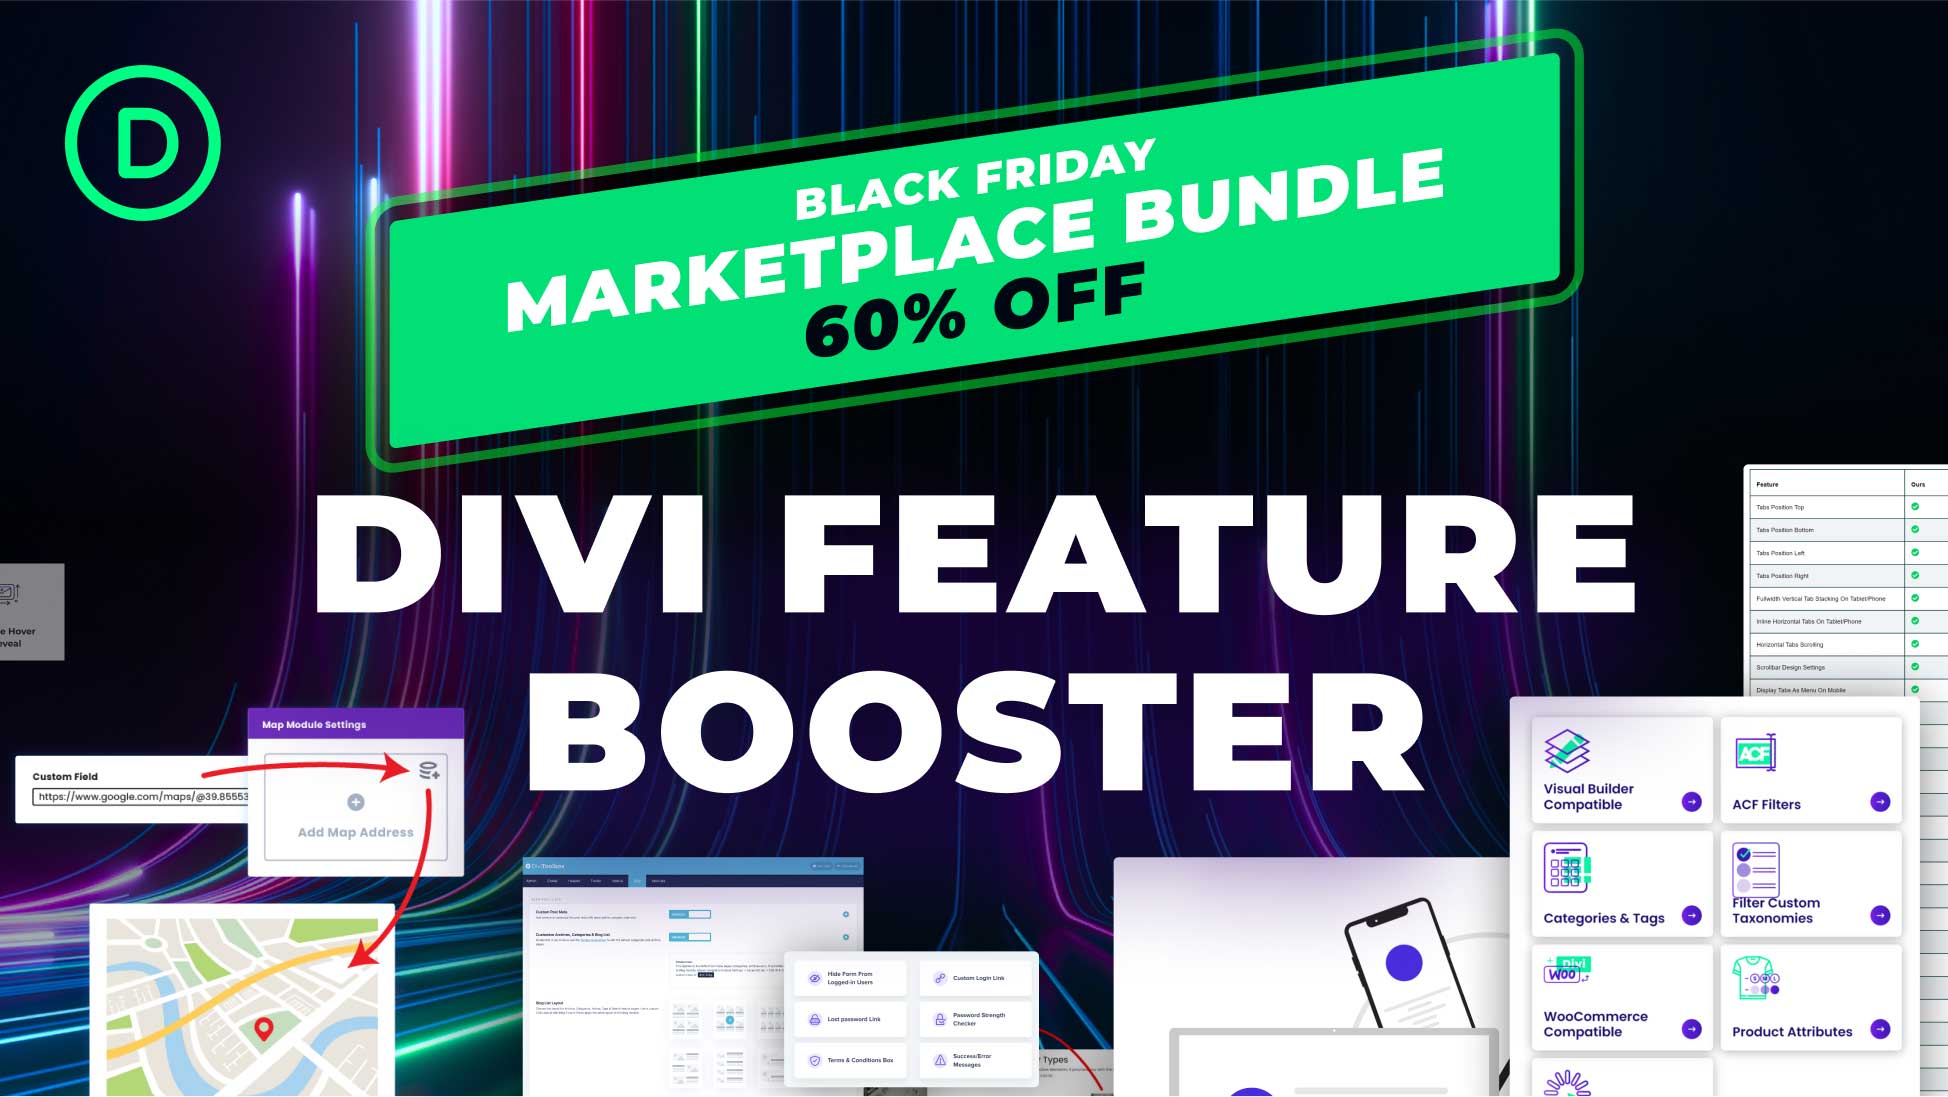 Introducing the Massive Black Friday Feature Booster Bundle